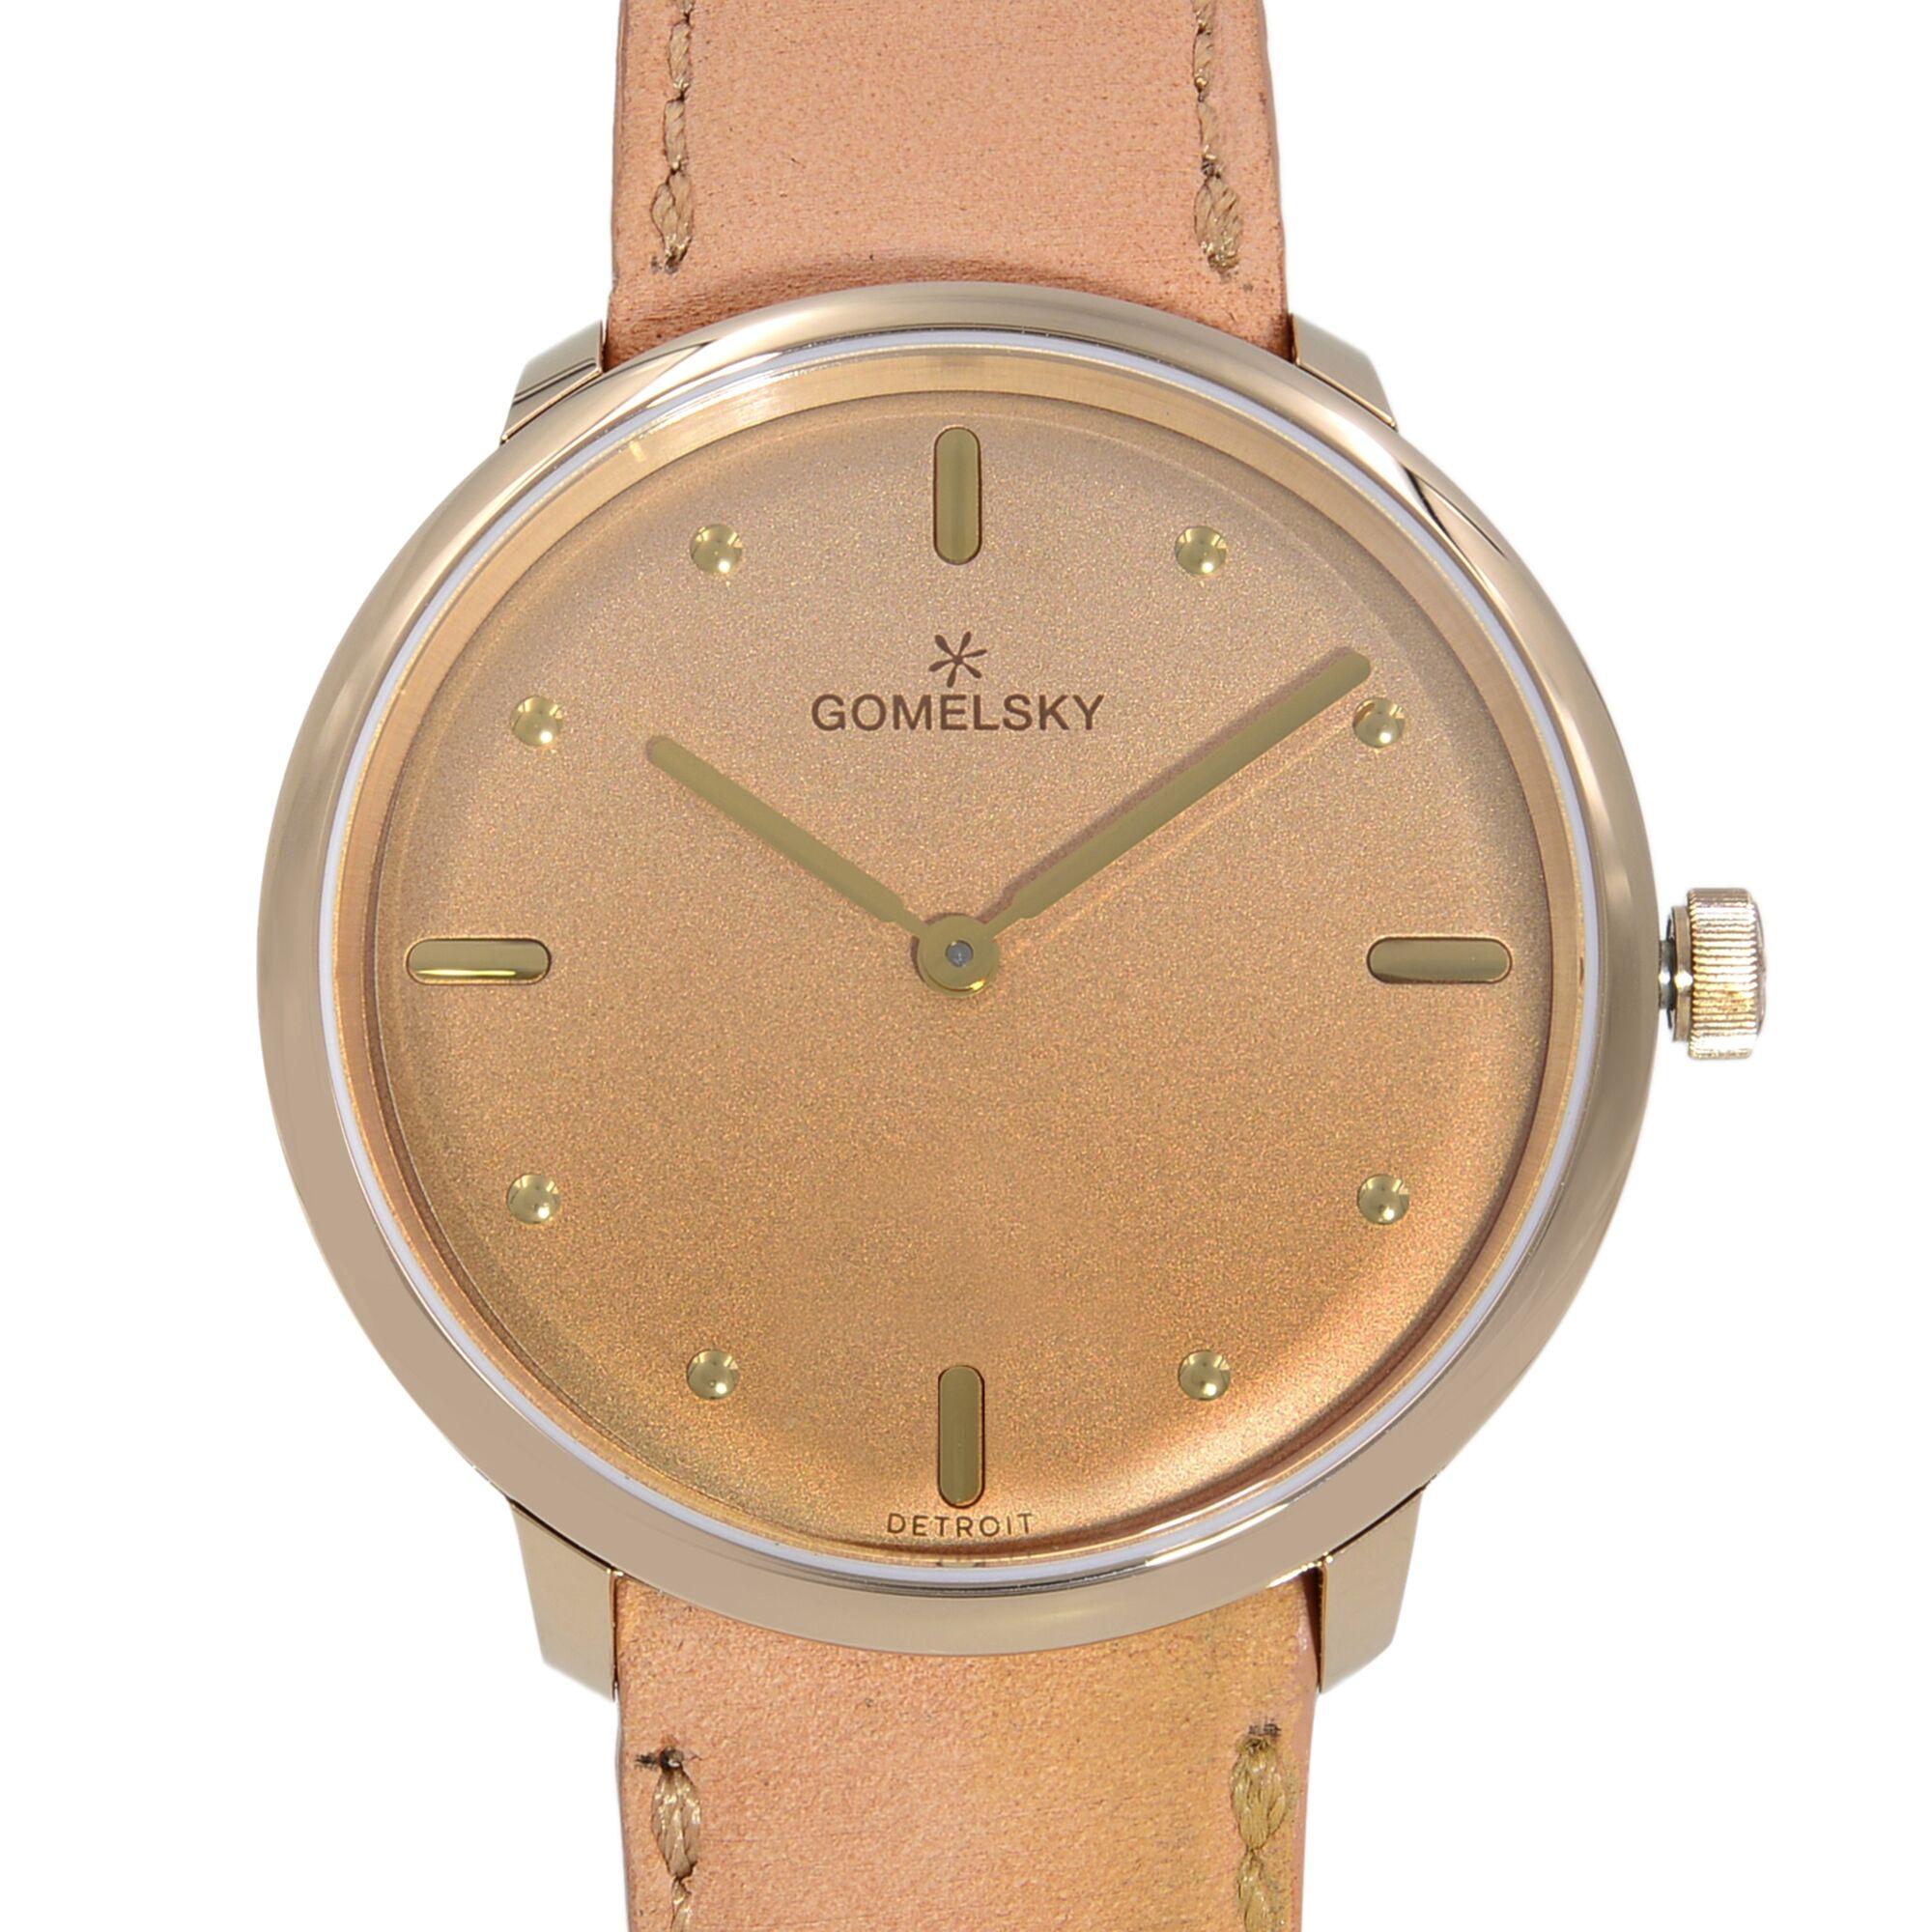 This brand new Gomelsky by Shinola Audrey 6 G0120147278 is a beautiful Ladies timepiece that is powered by a quartz movement which is cased in a stainless steel case. It has a round shape face,  dial, and has hand sticks & dots style markers. It is